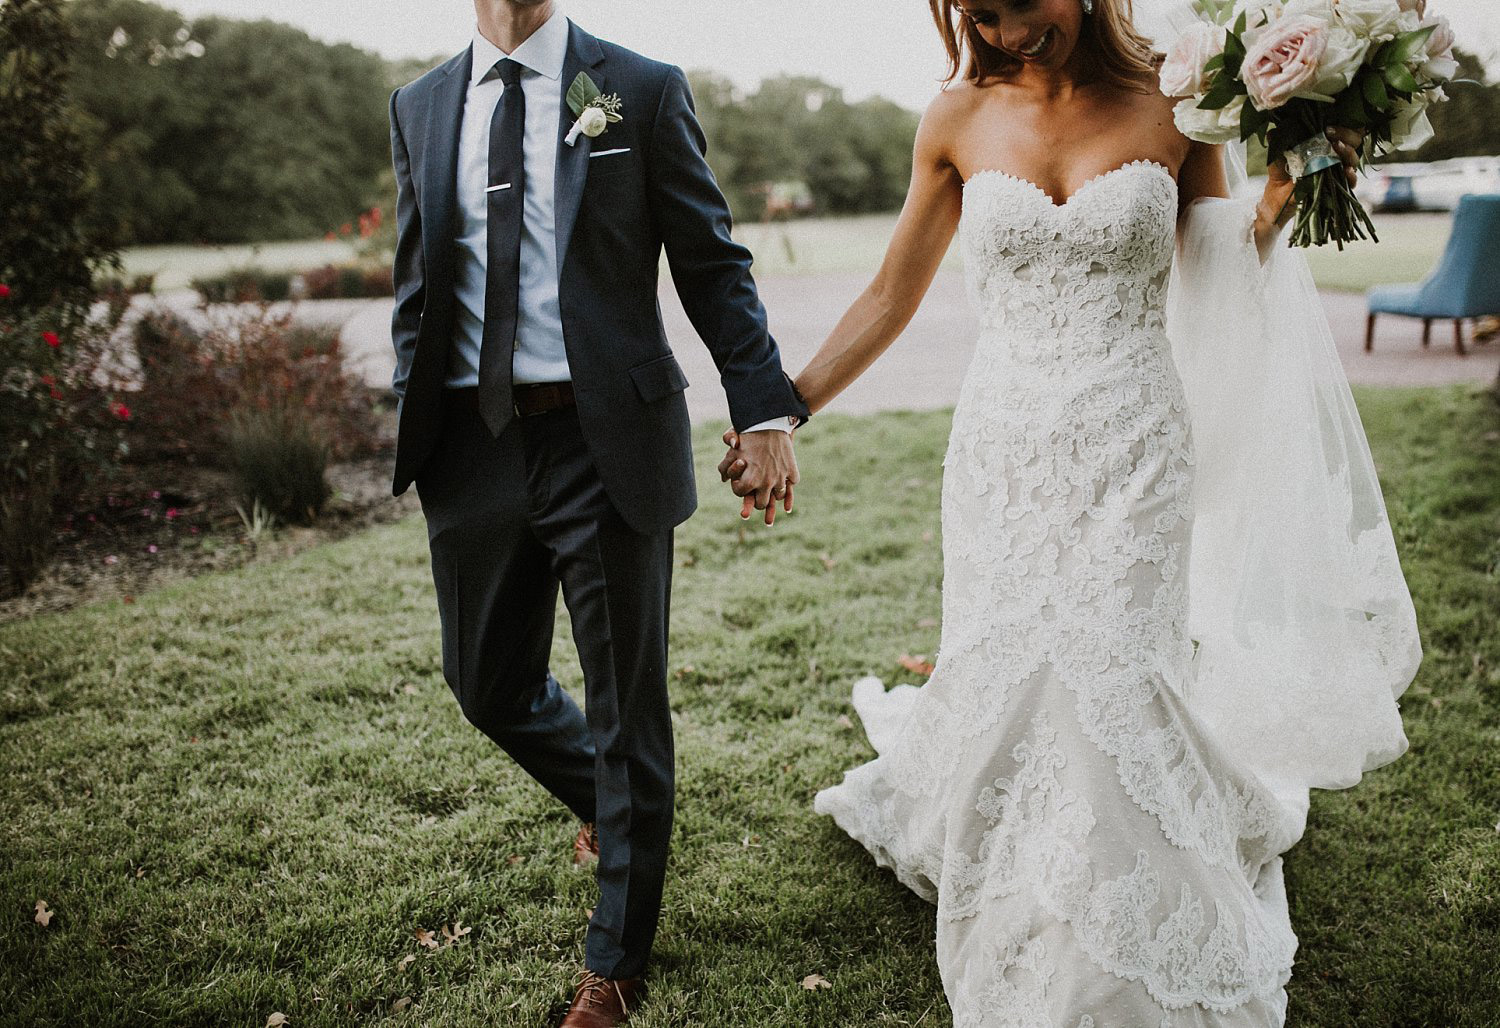 Bride in lace wedding dress holding hand of groom with dark grey suite and tie